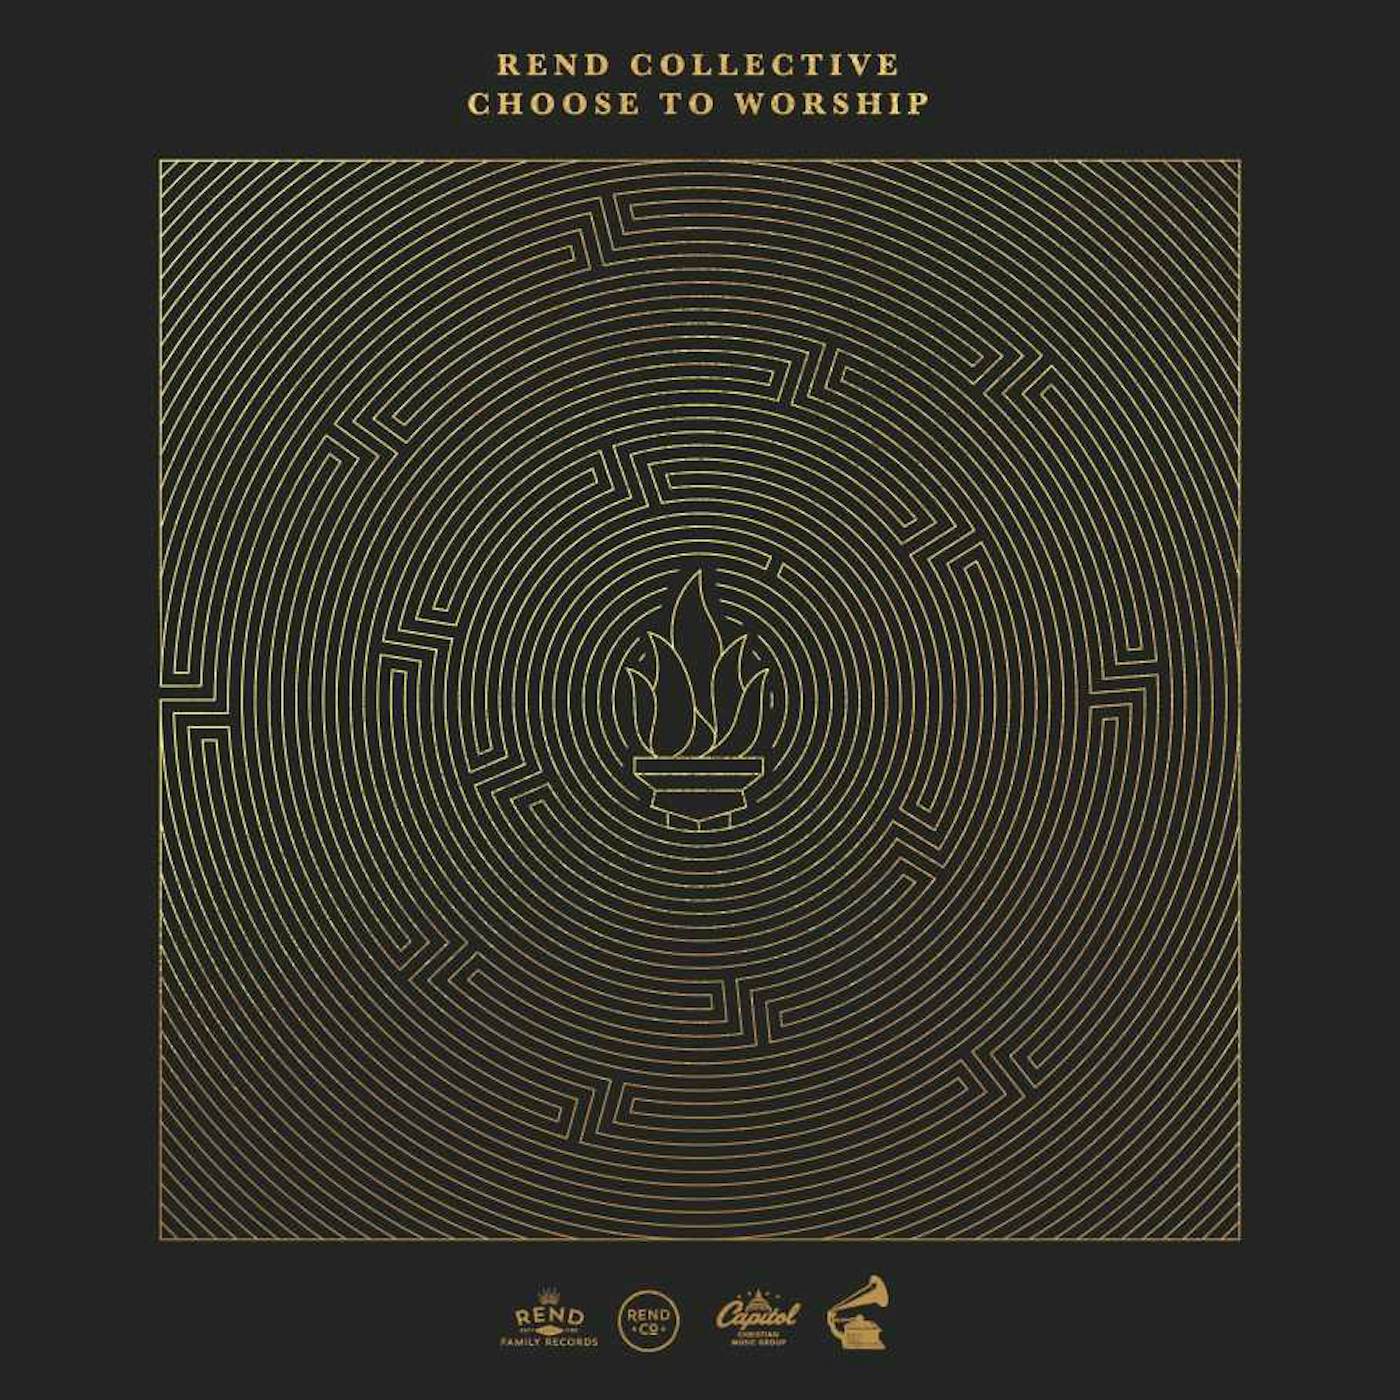 Rend Collective CHOOSE TO WORSHIP CD